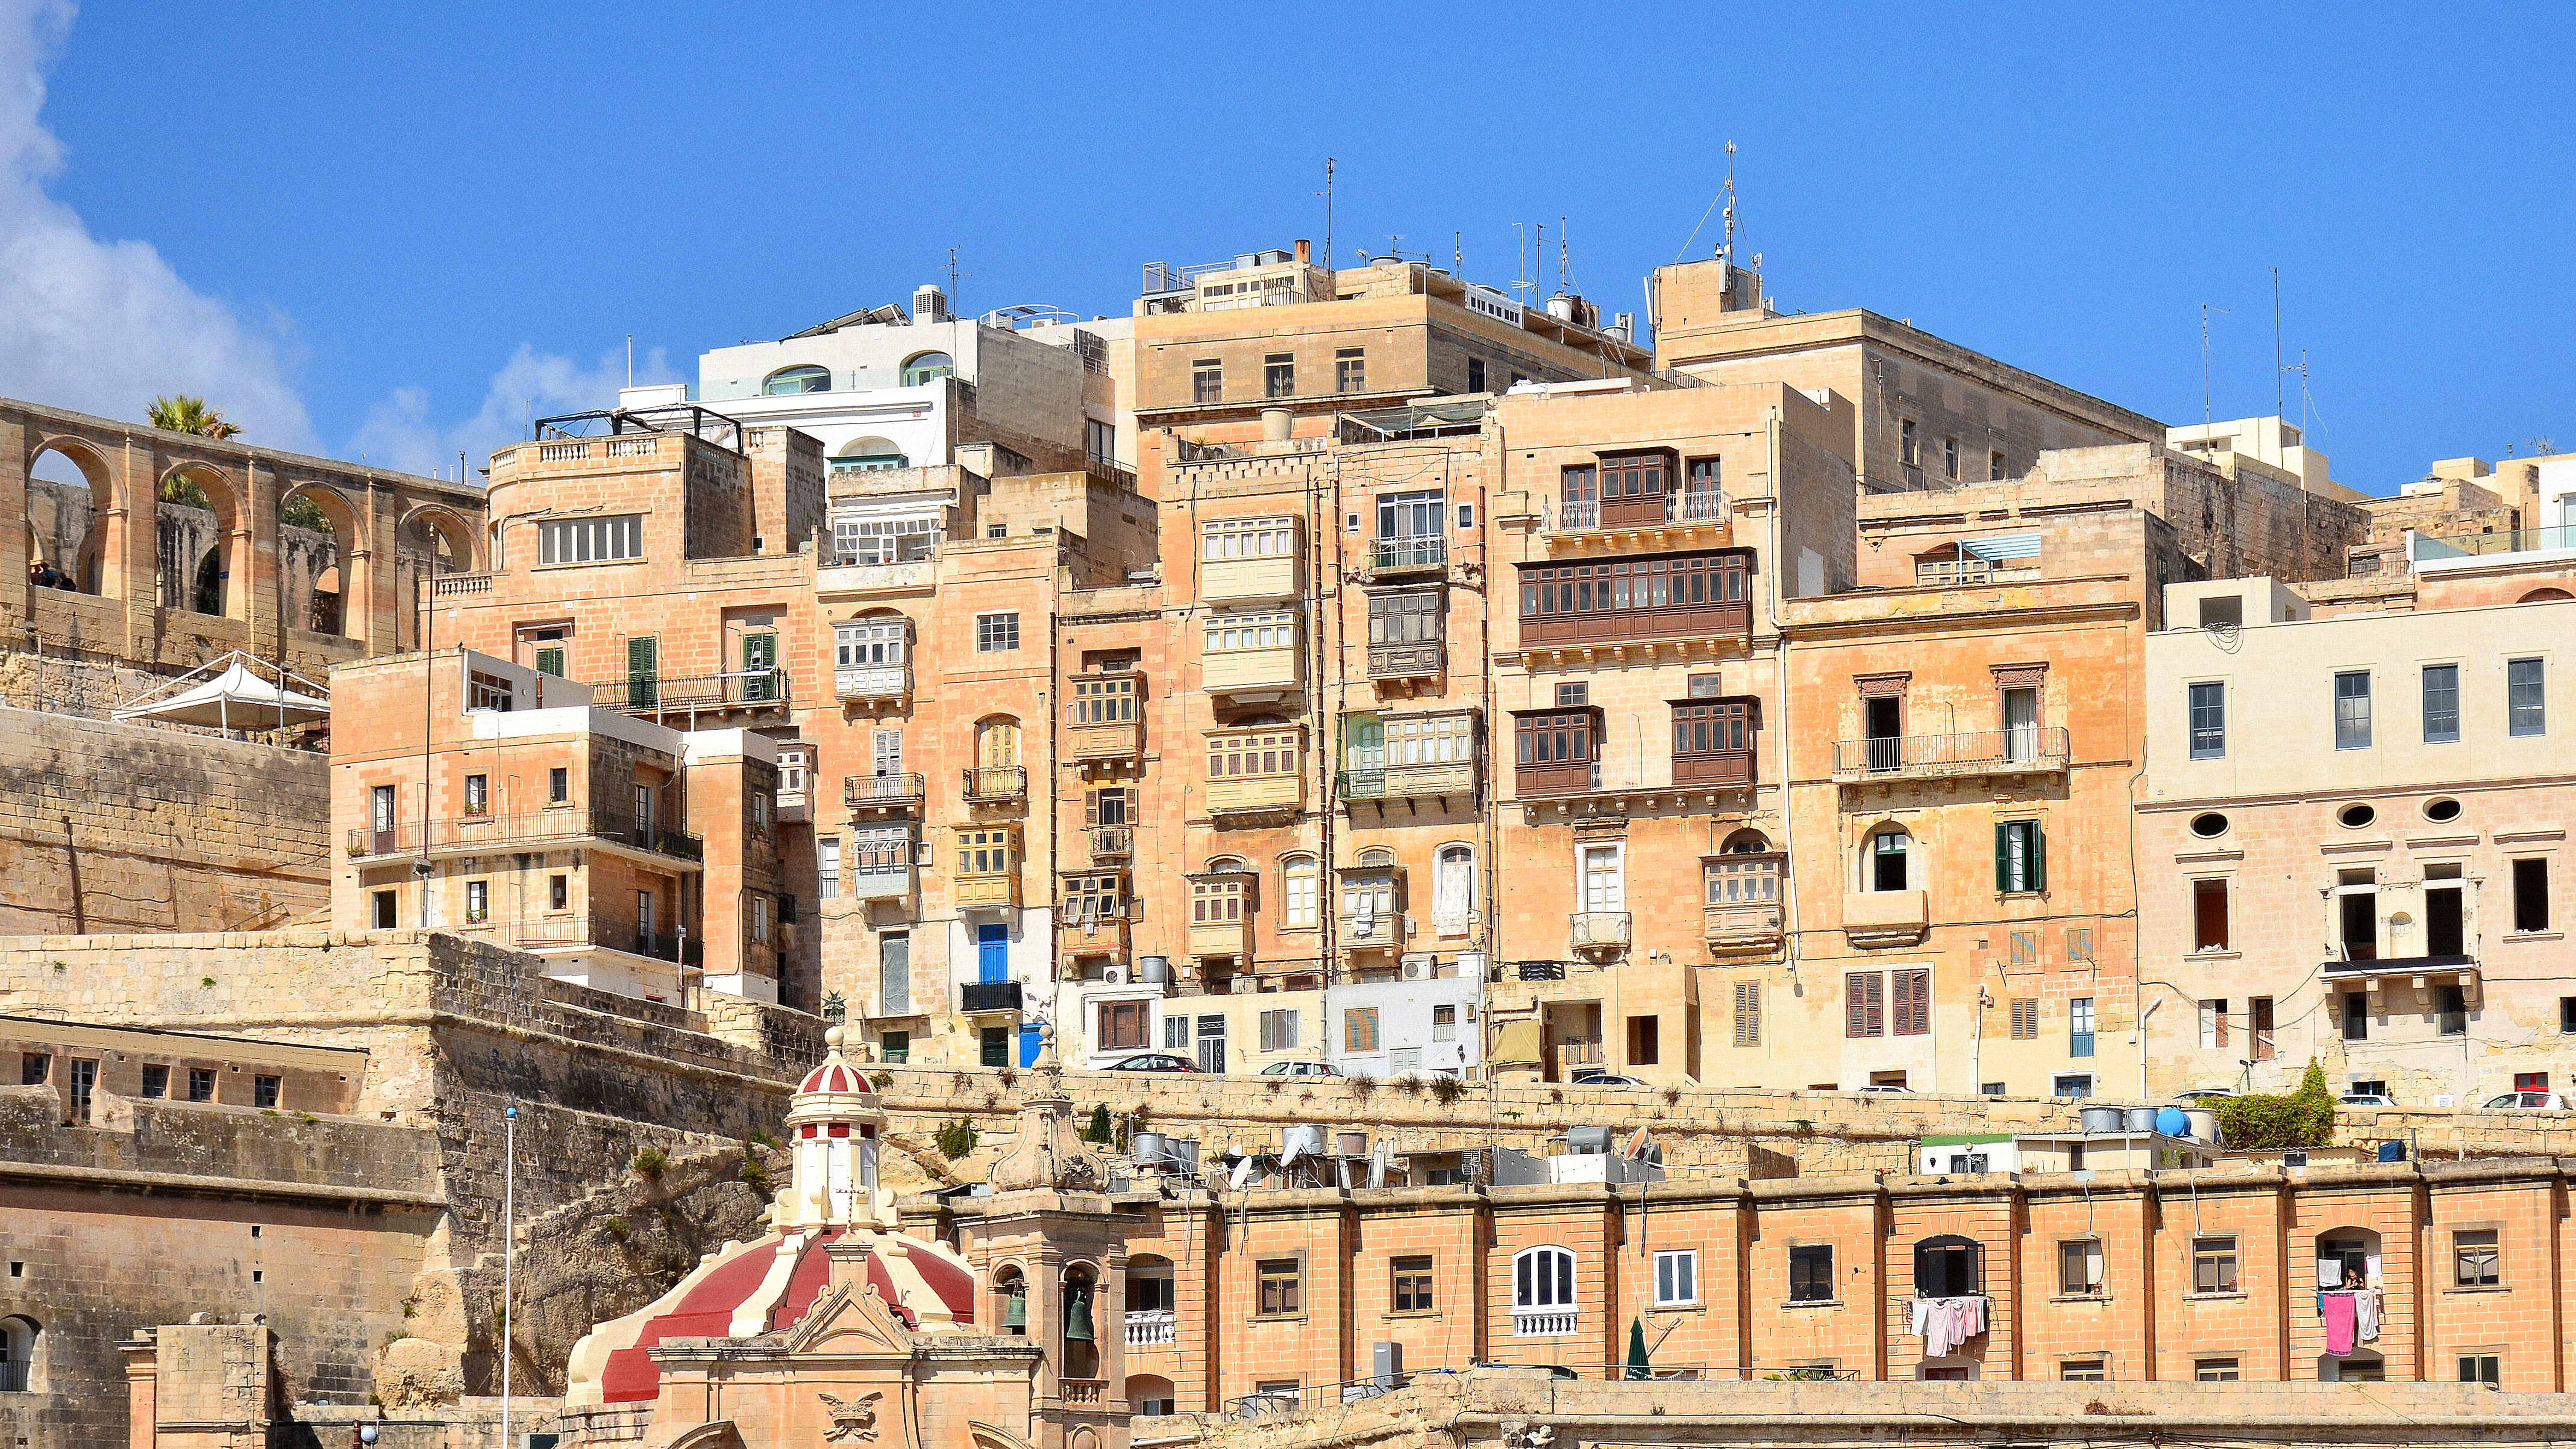 10 Tips for Planning a Trip to Malta